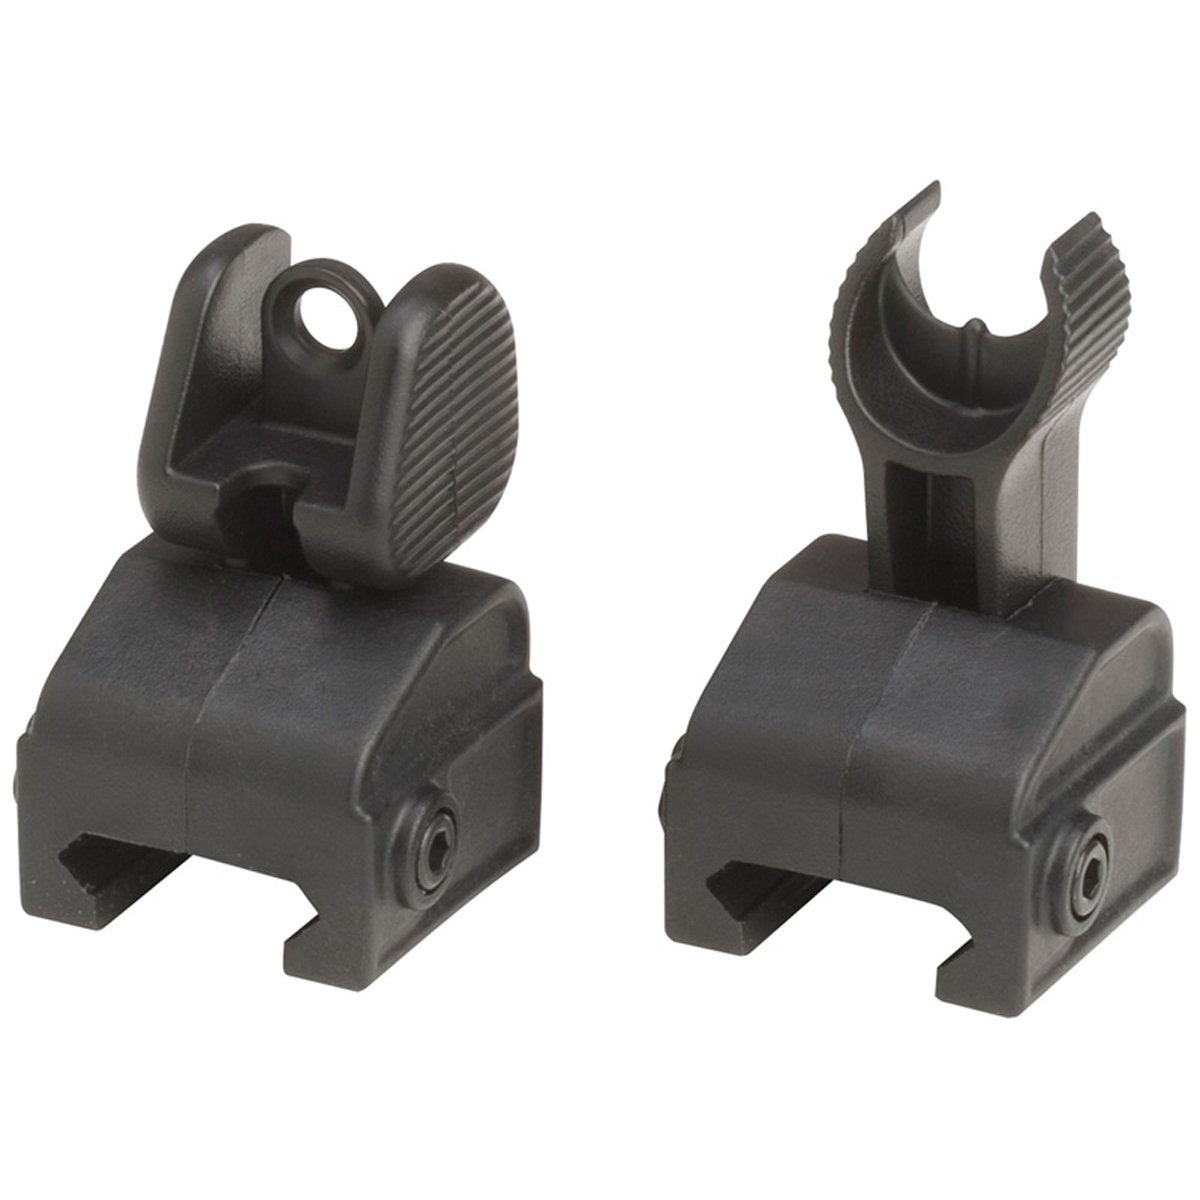 BT Front and Rear Flip-Up Sights - Empire Battle Tested